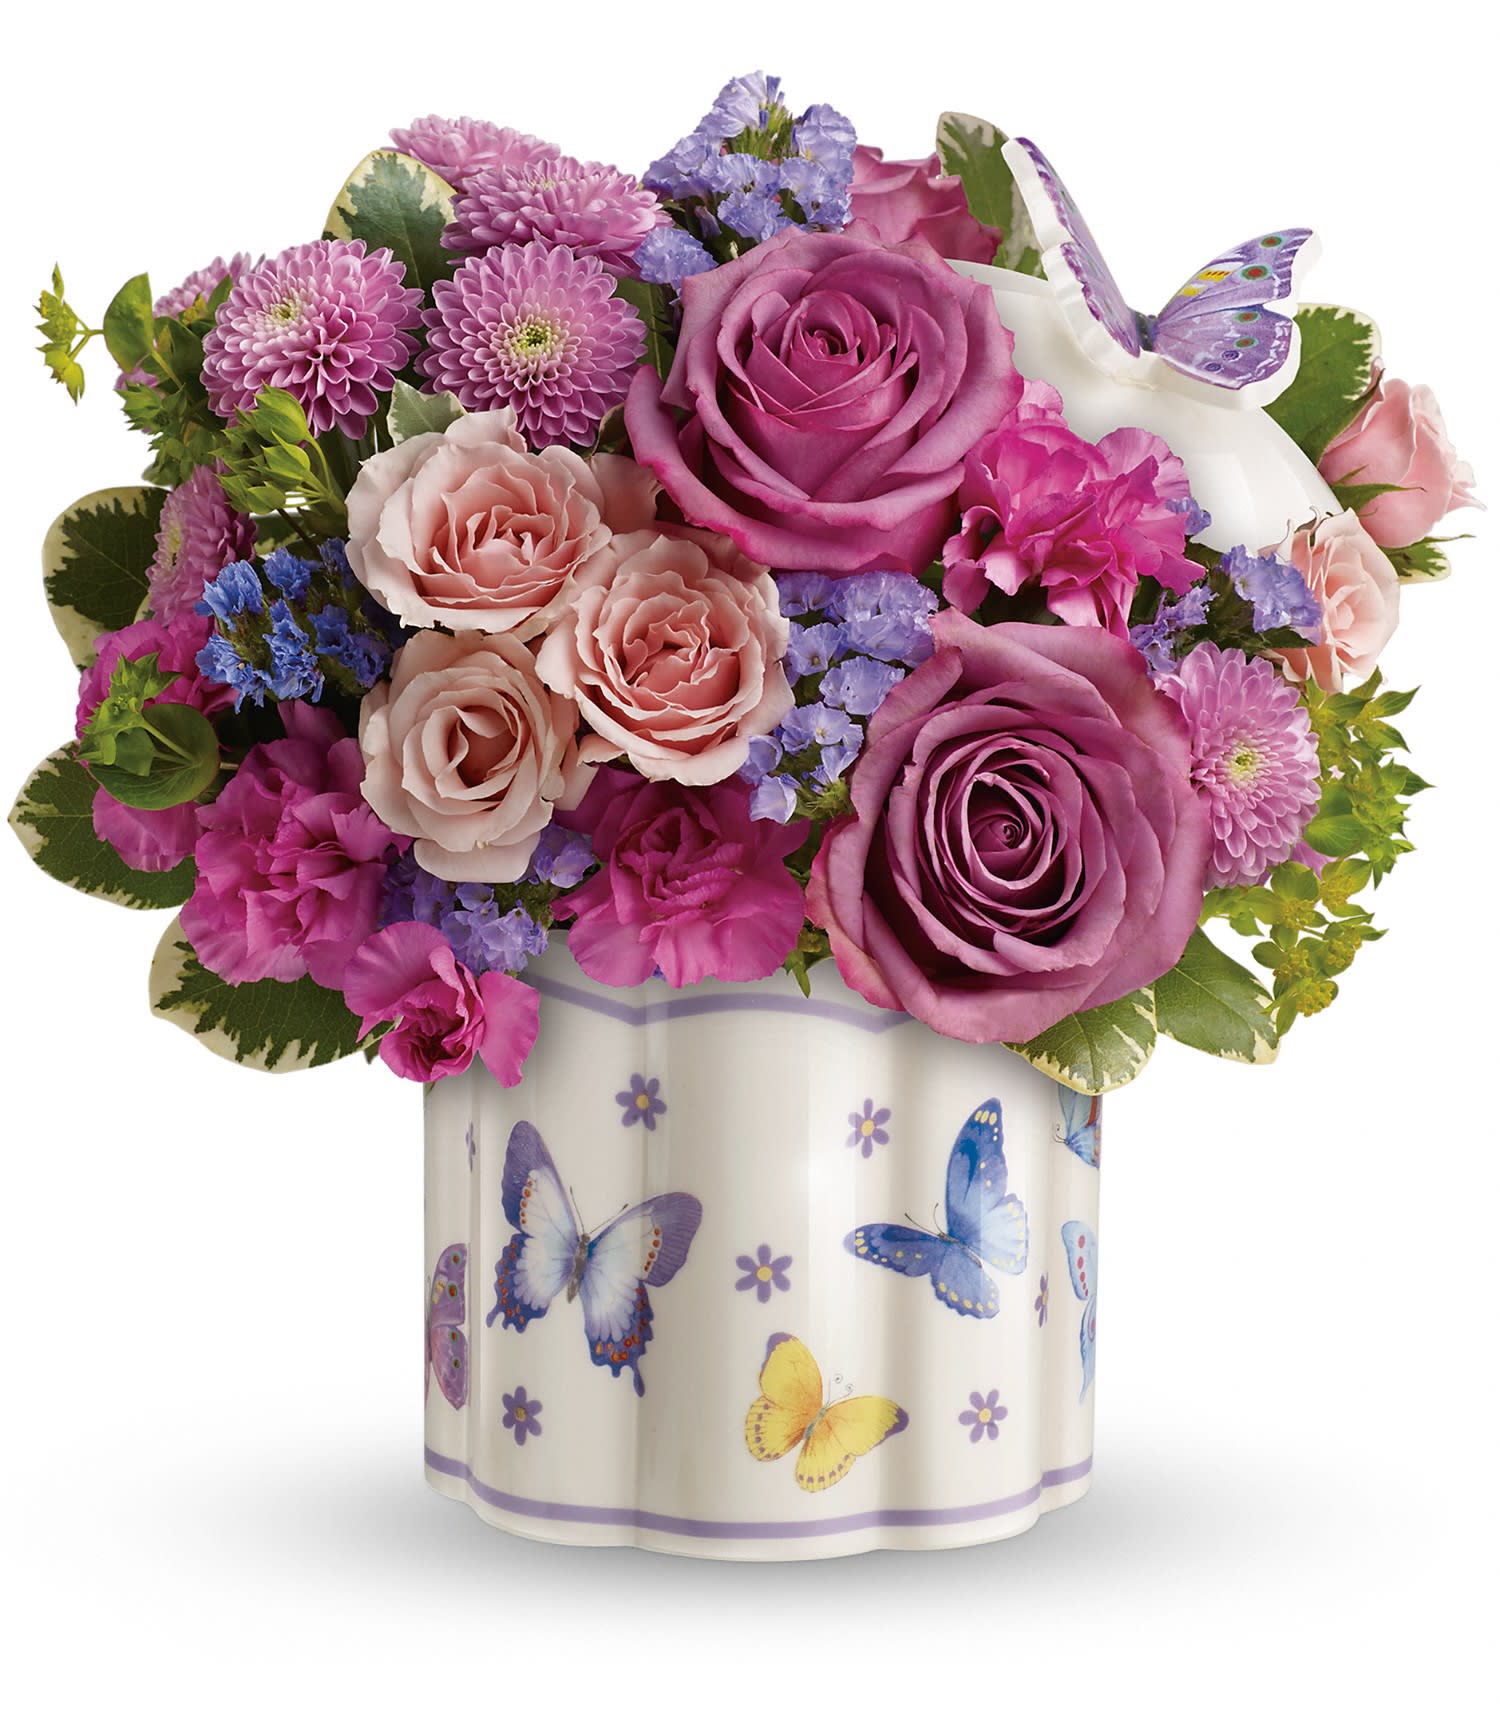  Field Of Butterflies Bouquet - This lush bouquet includes lavender roses, light pink spray roses, dark pink miniature carnations, lavender button spray chrysanthemums, lavender sinuata statice, bupleurum and variegated pittosporum. Delivered in a Field Of Butterflies keepsake box.  All-around SUBSTITUTION POLICY – Always deliver the freshest flowers! Please note the bouquet pictured reflects our original design.  If the exact flowers or container in this arrangement are not available, our local florists will create a beautiful bouquet with the freshest available flowers.  Orientation: All Around  